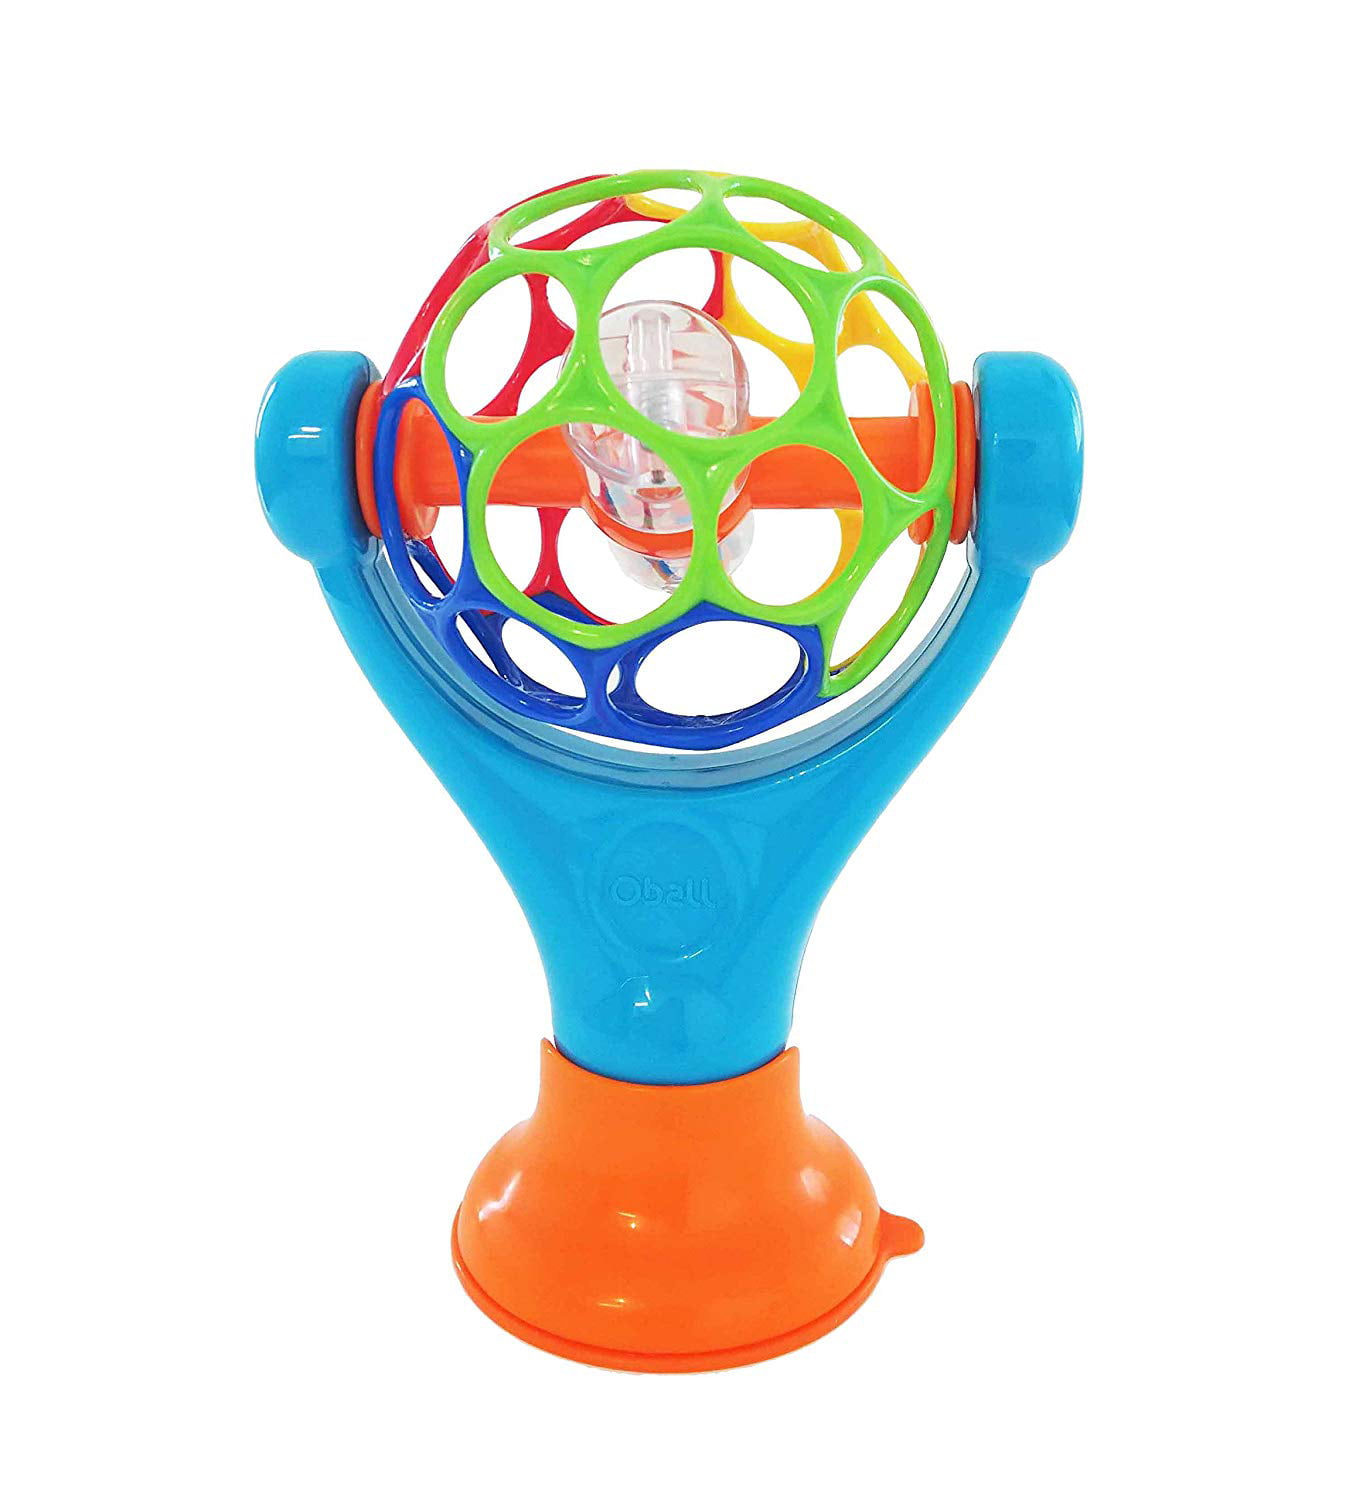 Dasfie Baby Grasping Ball Hole Rattle Hand Catching Soft Ball Toys for Infant Newborn Baby Flexible and Easy to Grip Design Sensory Toy Oball Grabber Ball for Baby